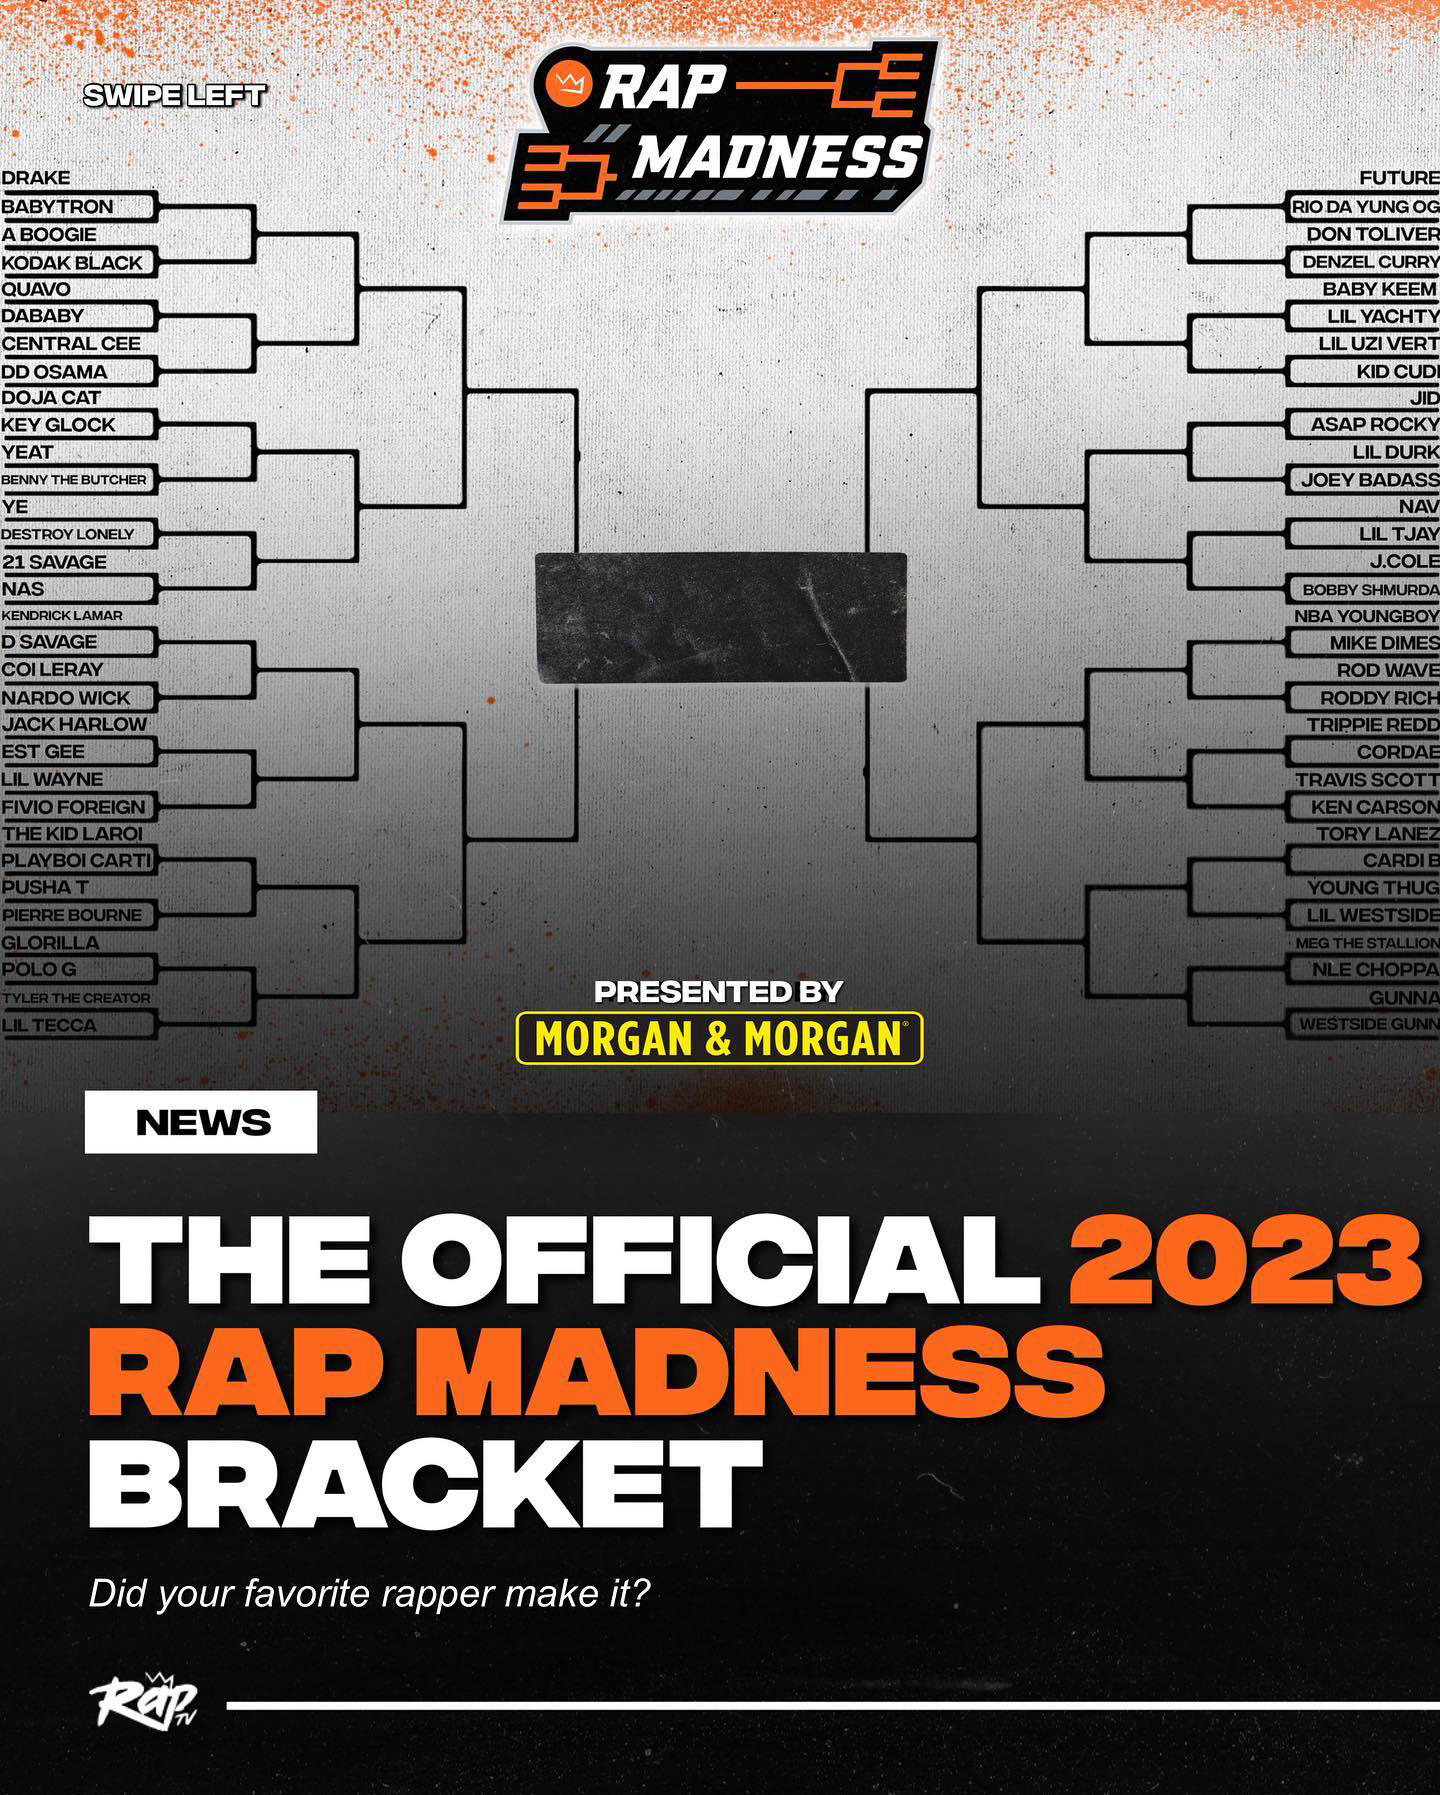 The Official #RapMadness Bracket is here